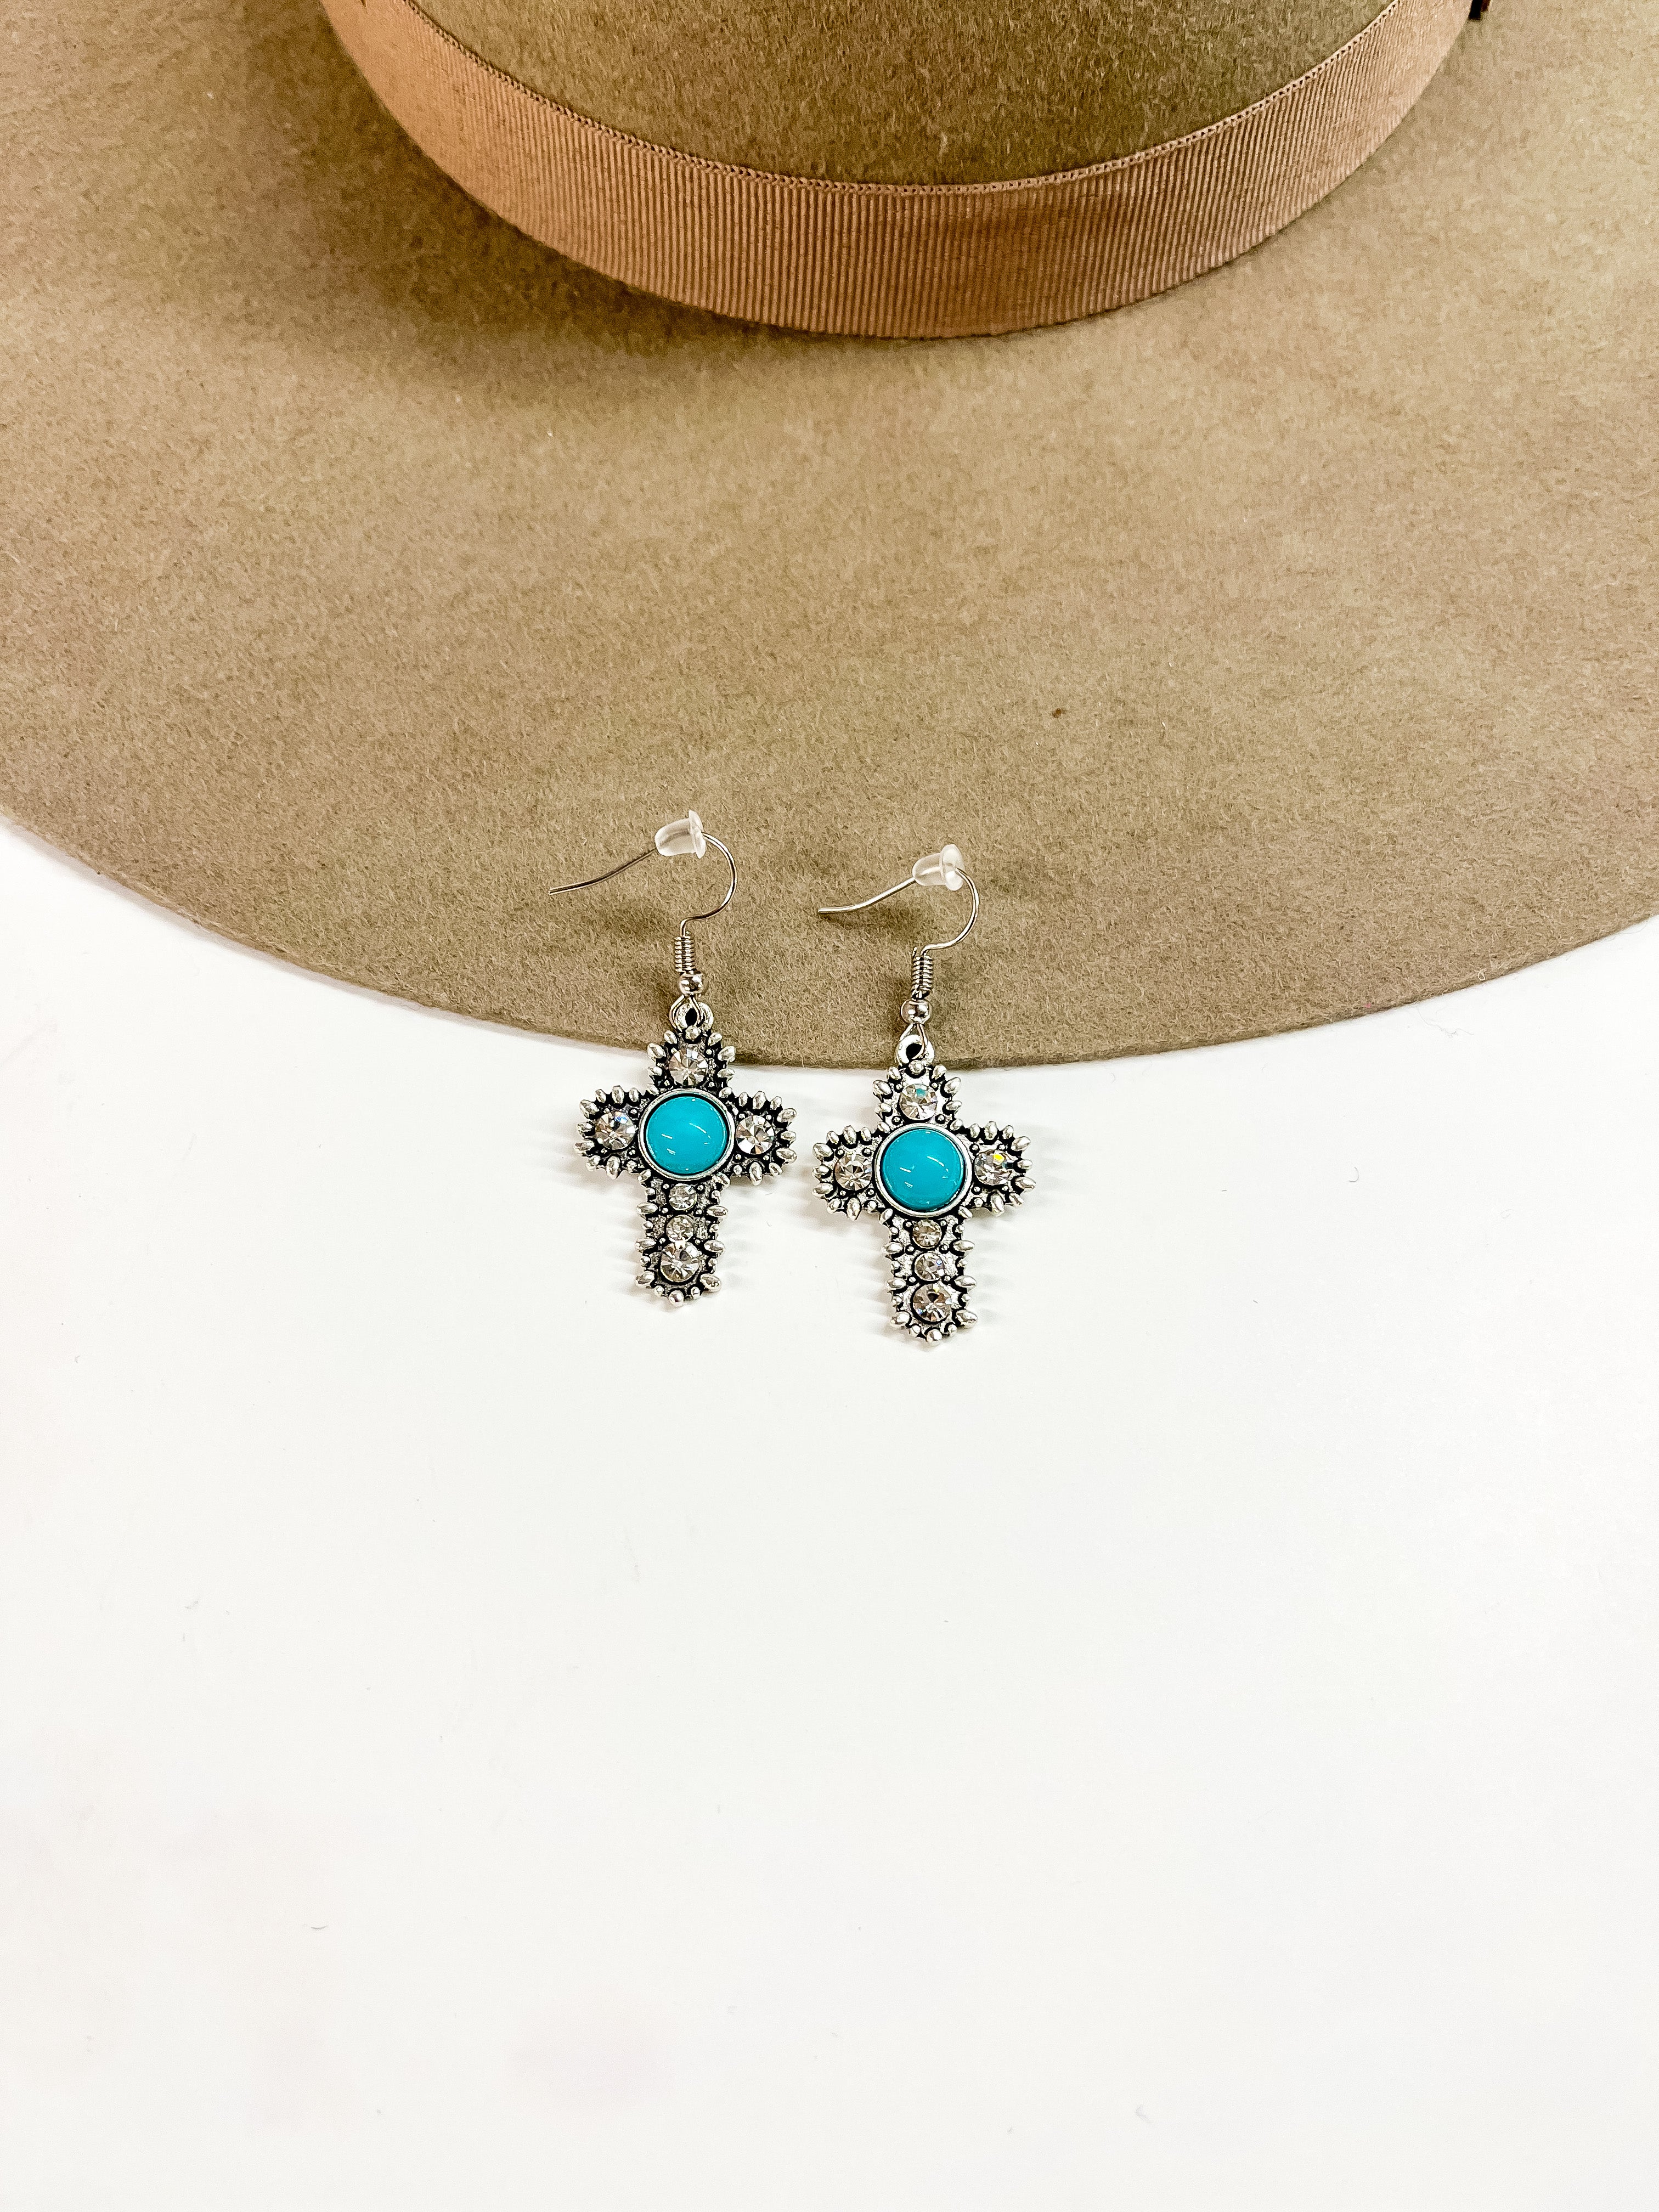 This is a pair of silver detailed cross earrings with small clear crystals  and a turquoise circle stone in the center.  These earrings are laying on a brown felt hat brim and on a white background.